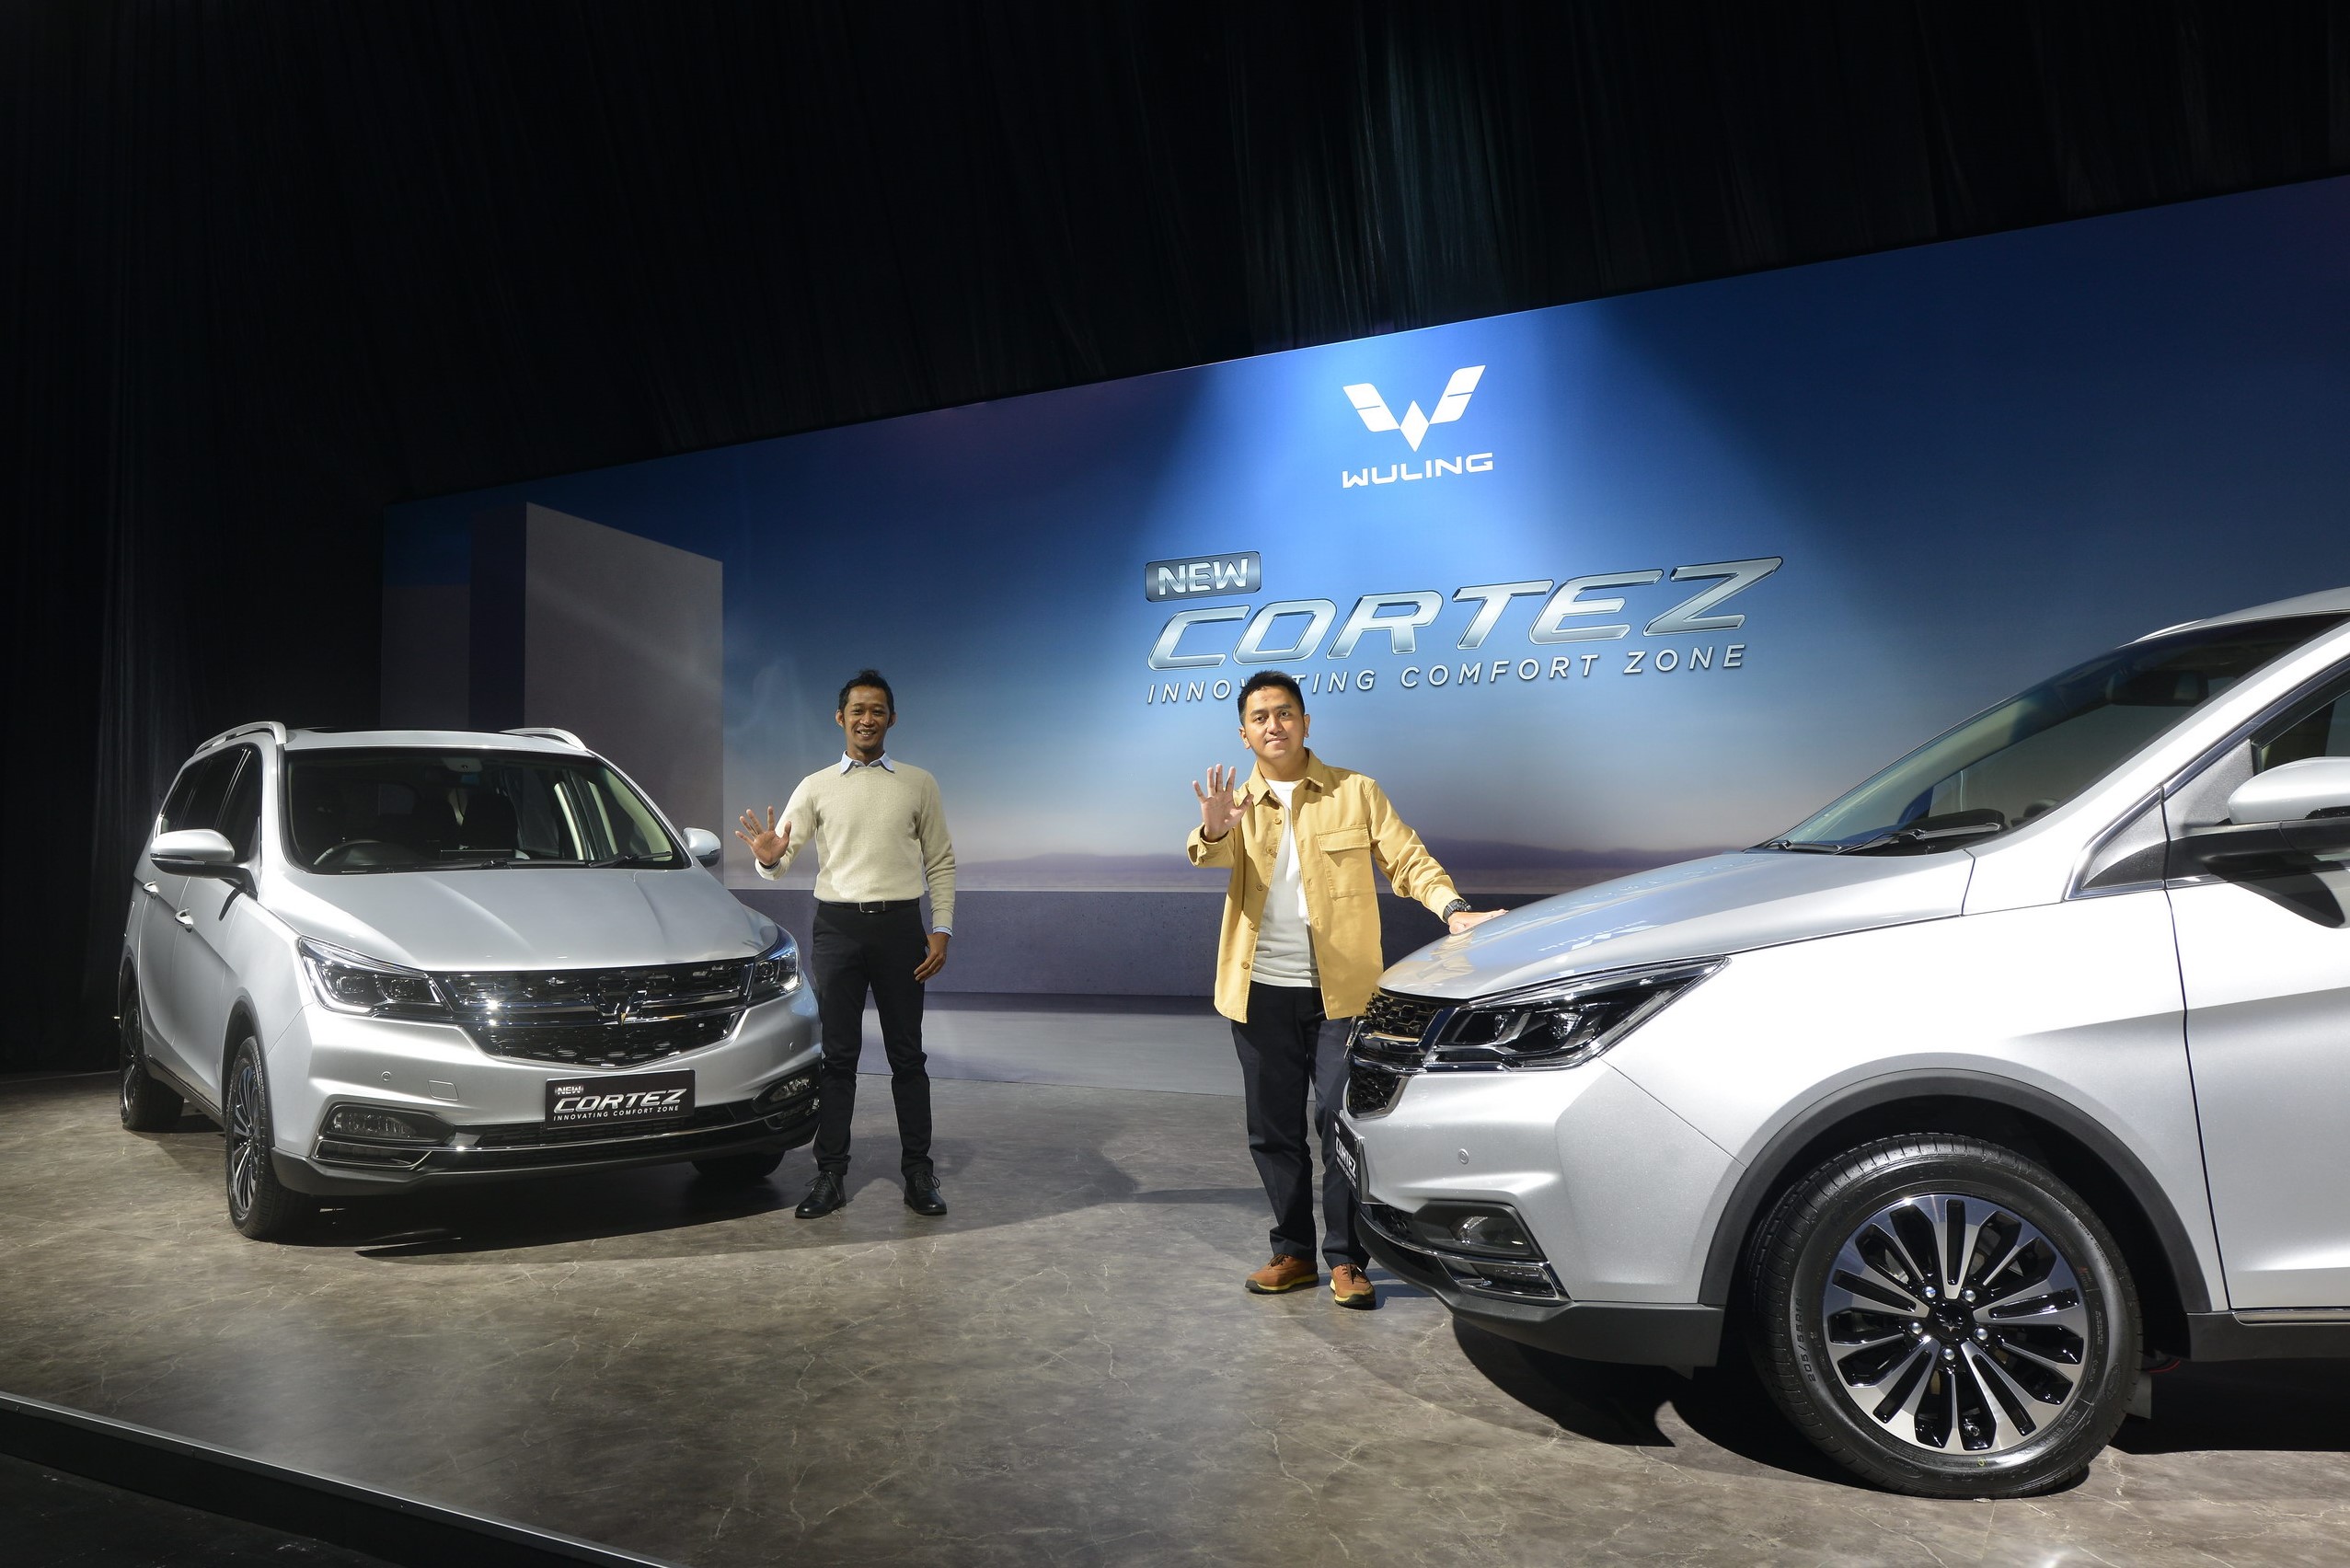 Image Wuling New Cortez as Smart MPV with WIND and IoV Innovations